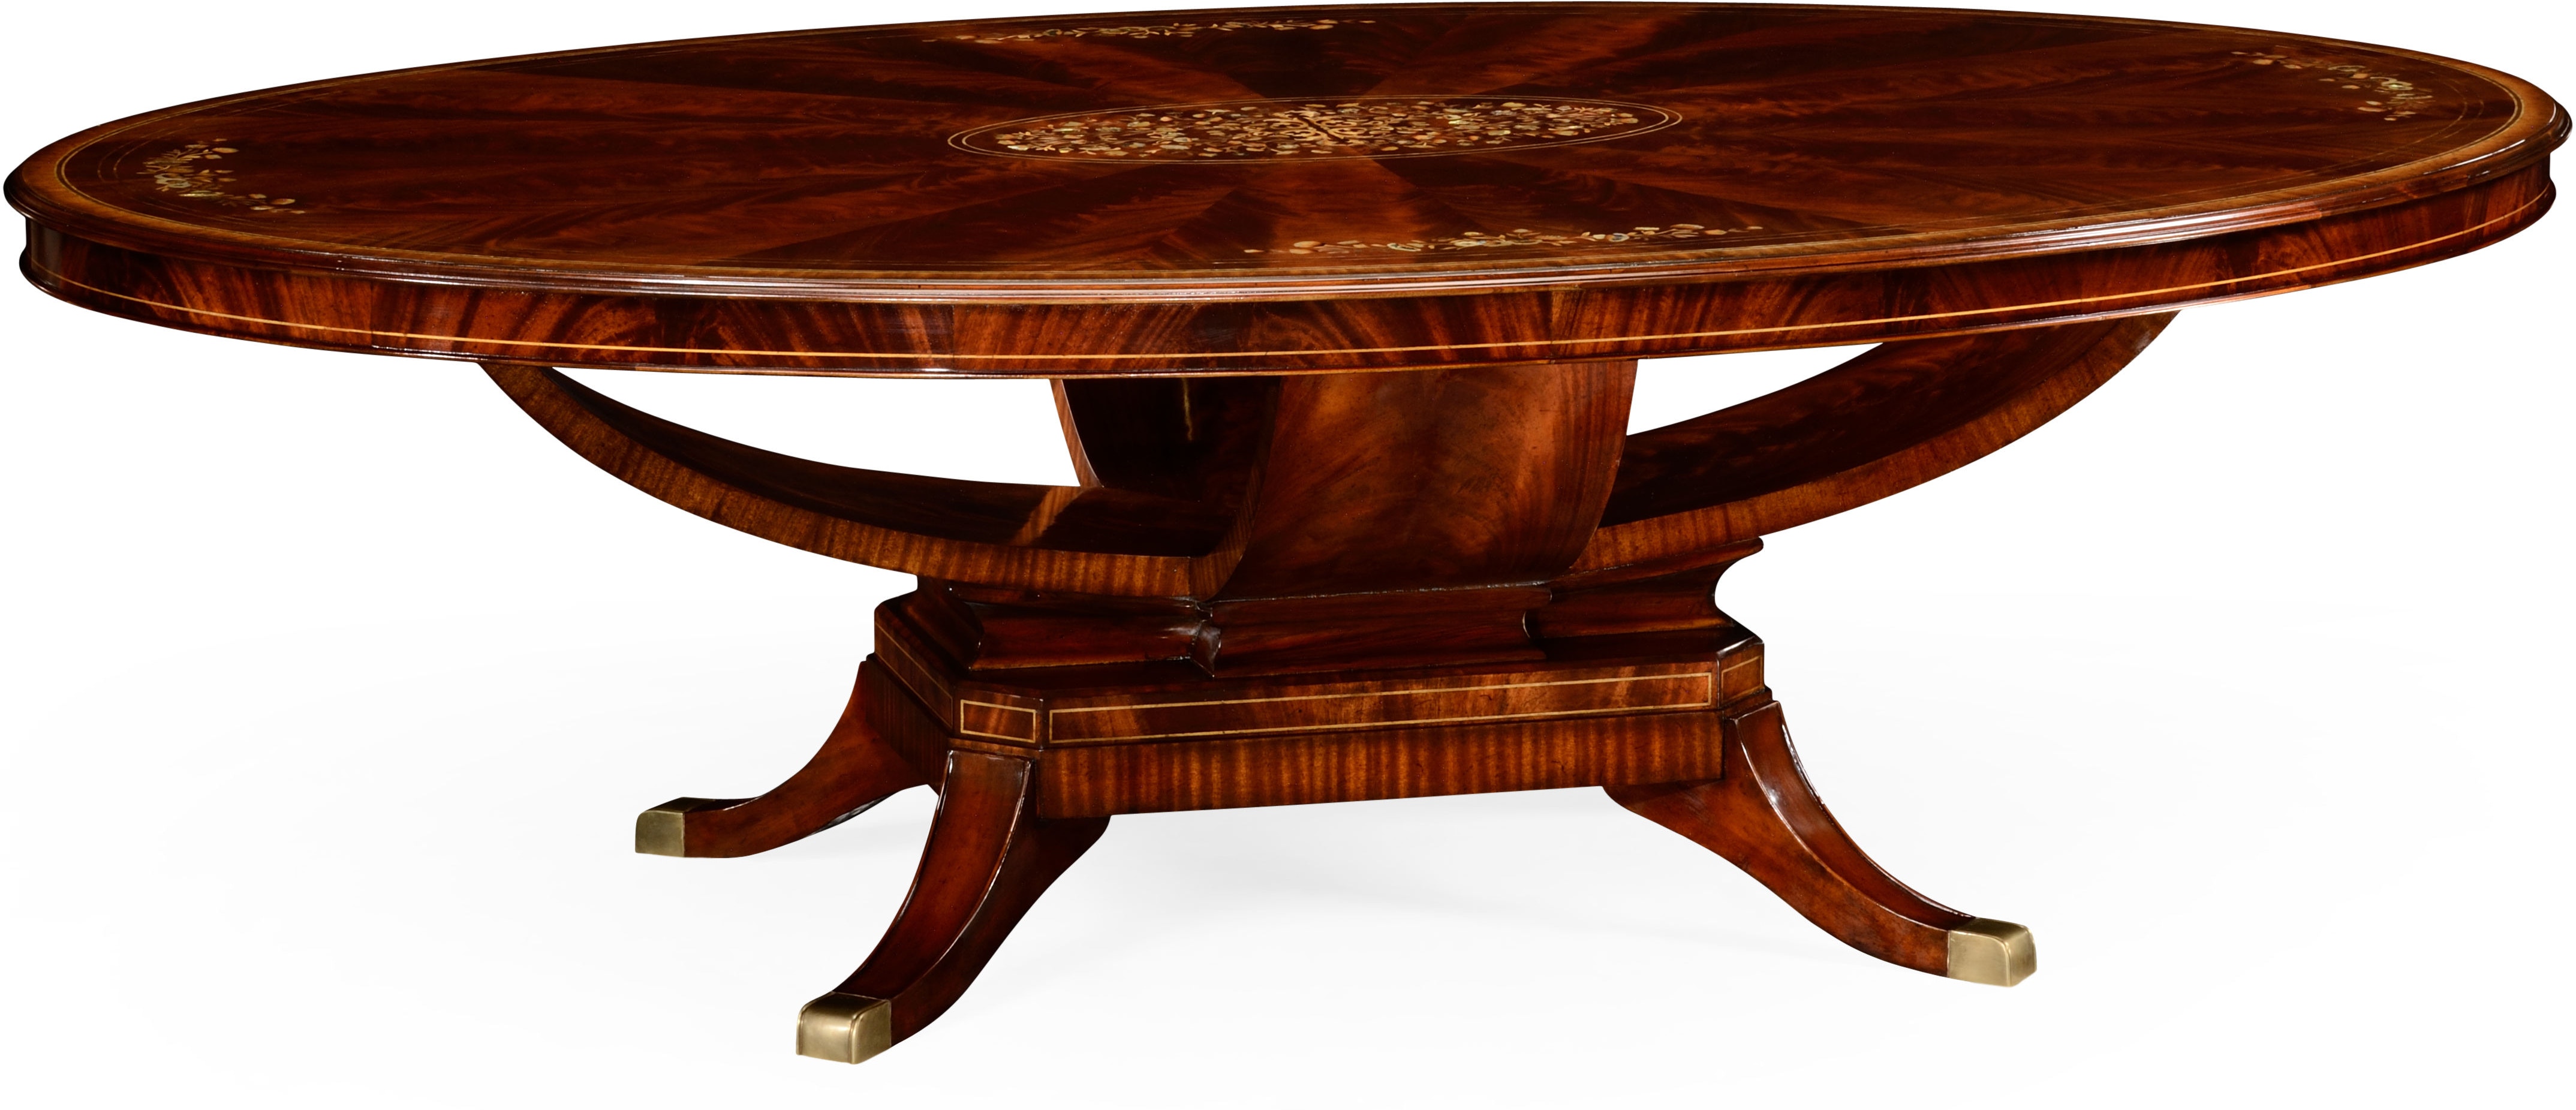 96 Biedermeier Style Oval Dining Table With Fine Mop Marquetry